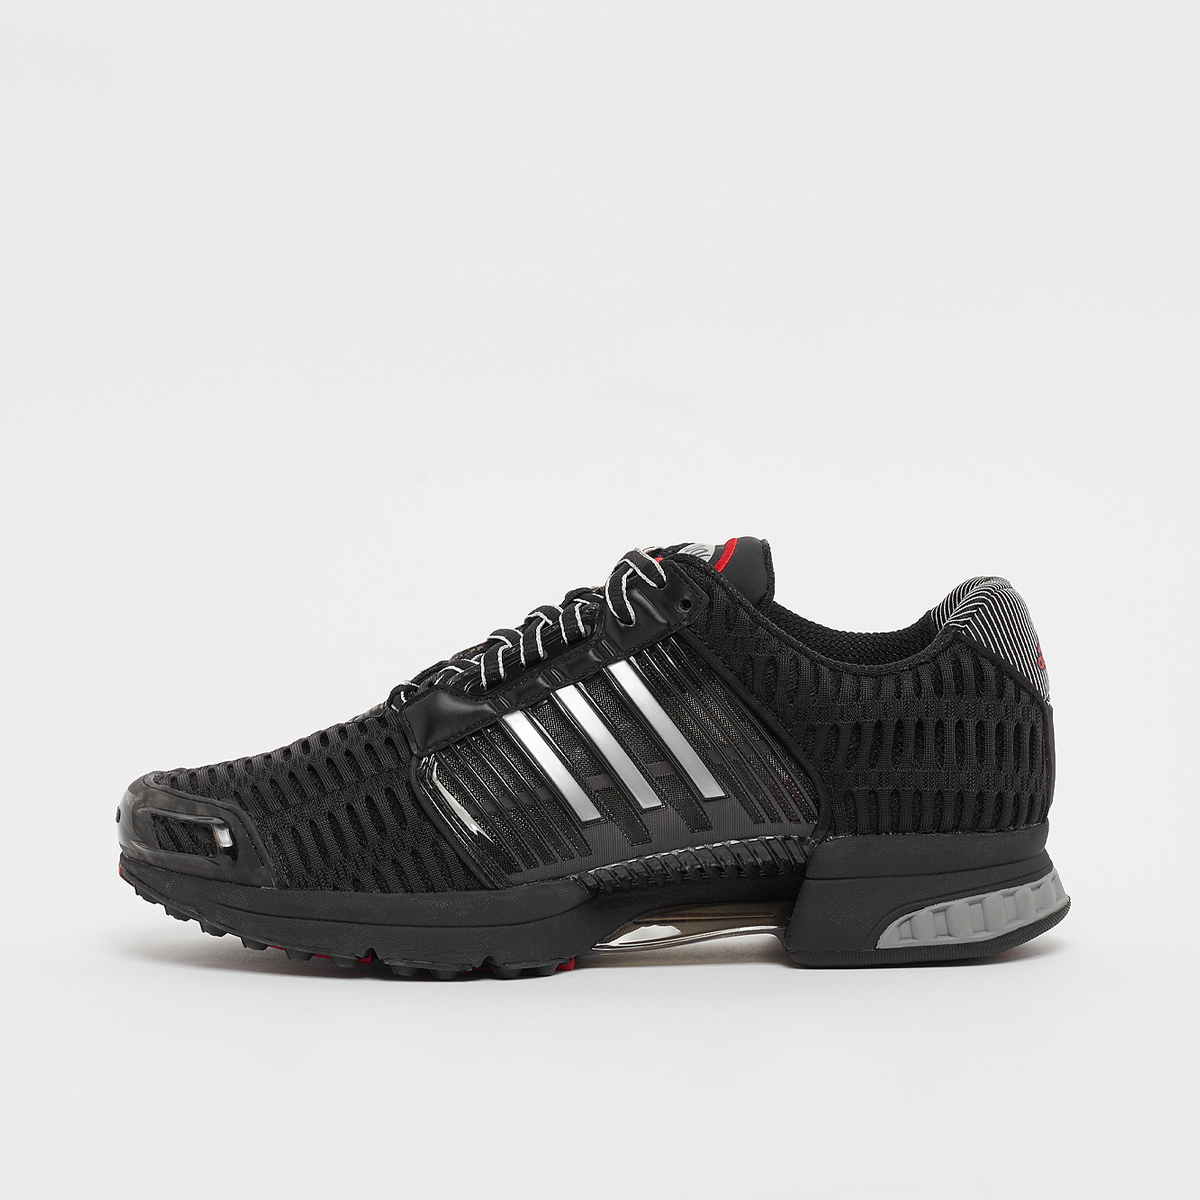 Sneaker Climacool 1, adidas Originals, Footwear, core black/red/core black, taille: 36 2/3